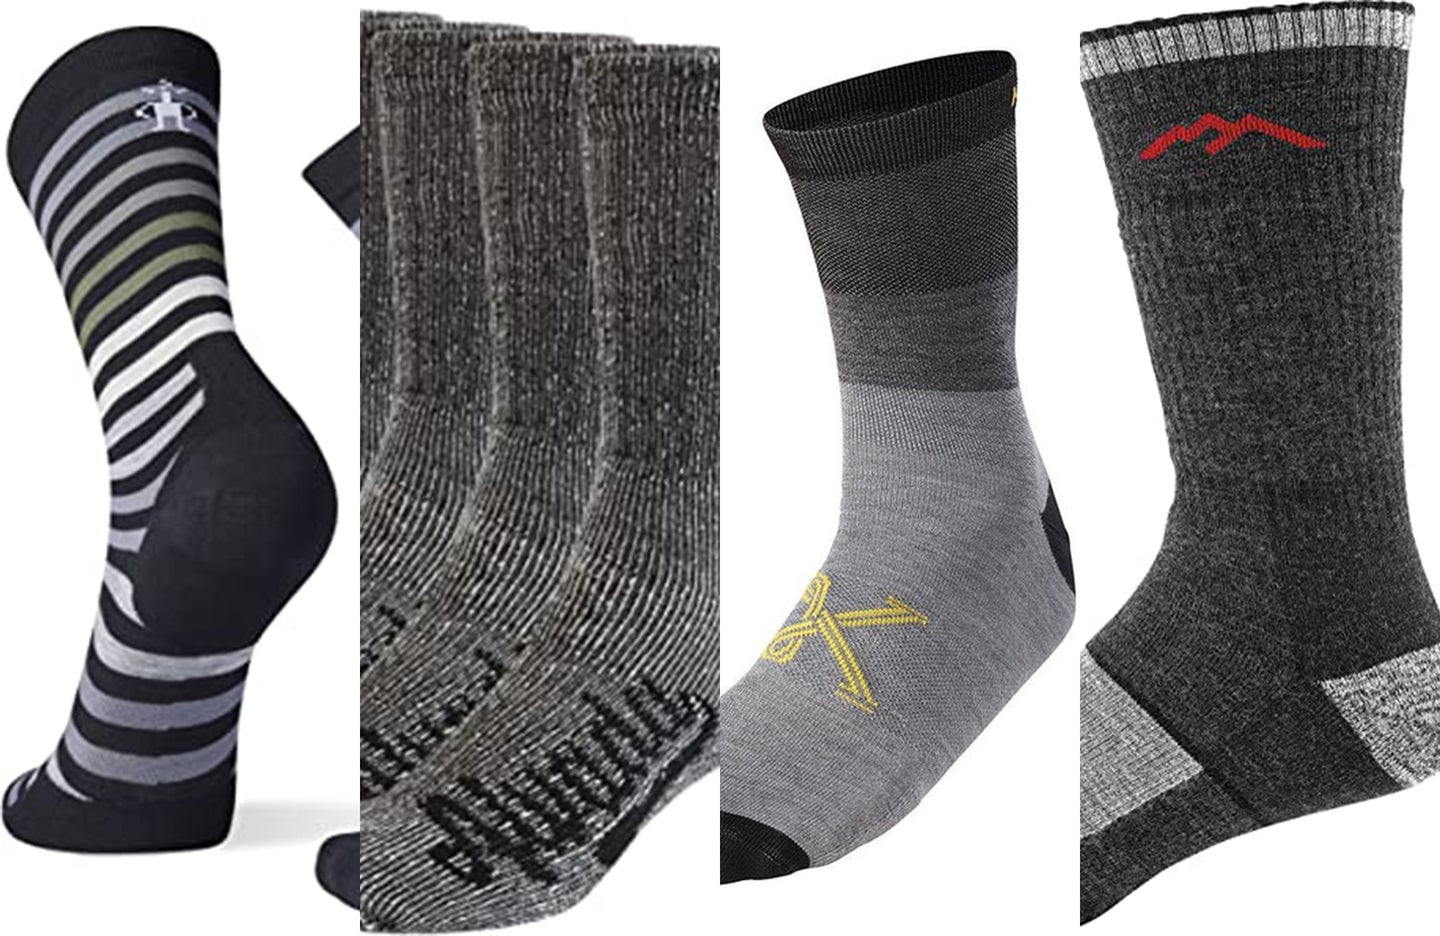 A lineup of the best wool socks on a white background